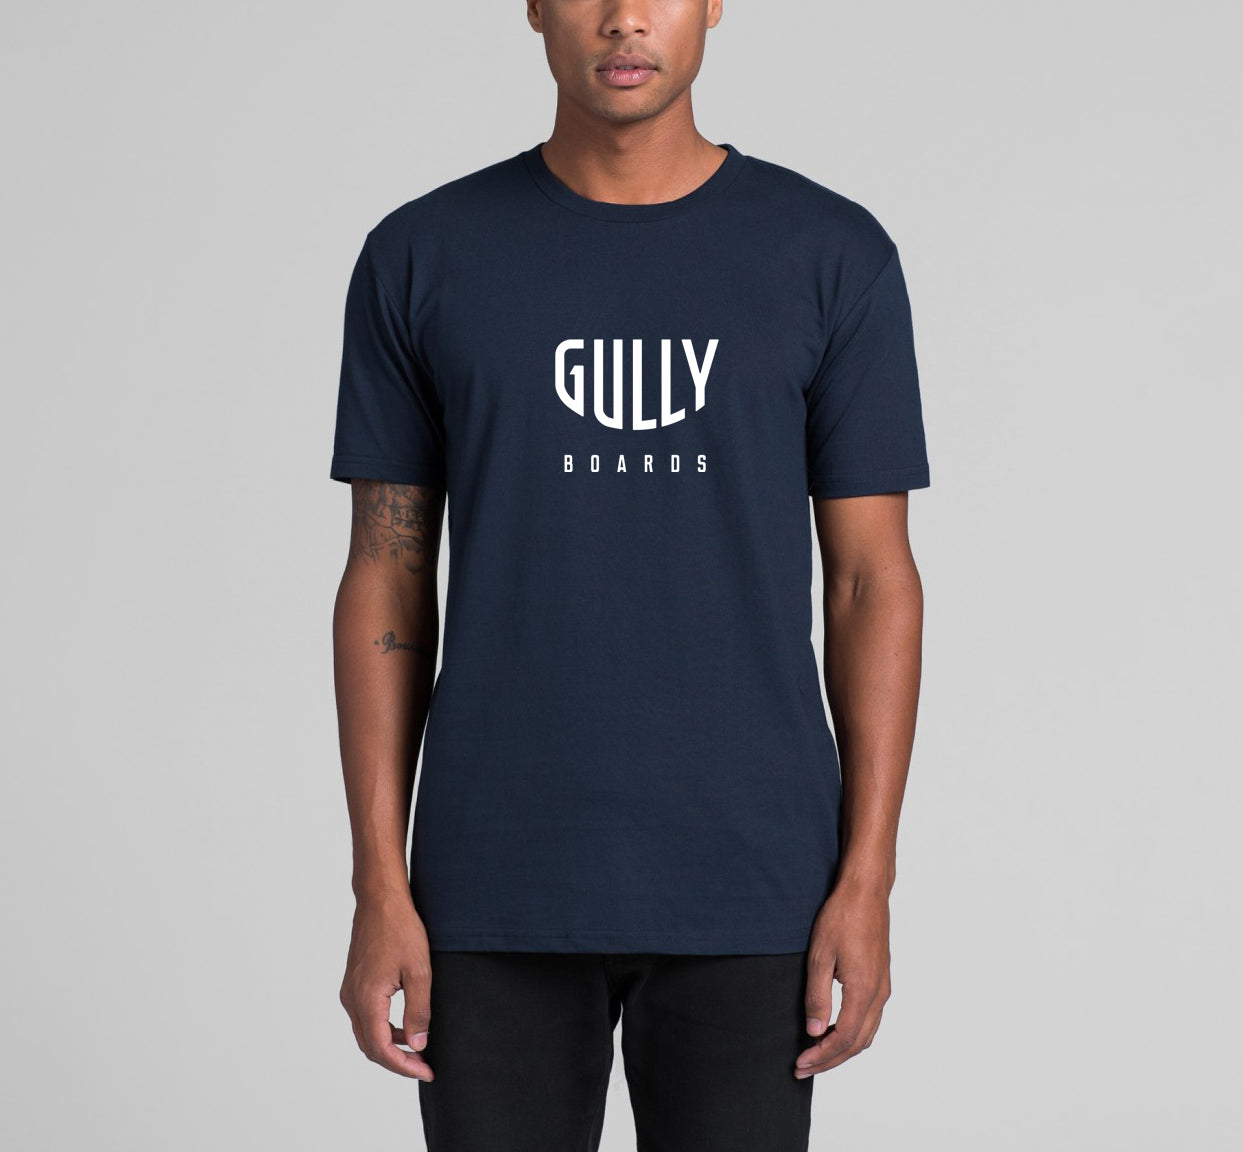 Gully Boards Tee